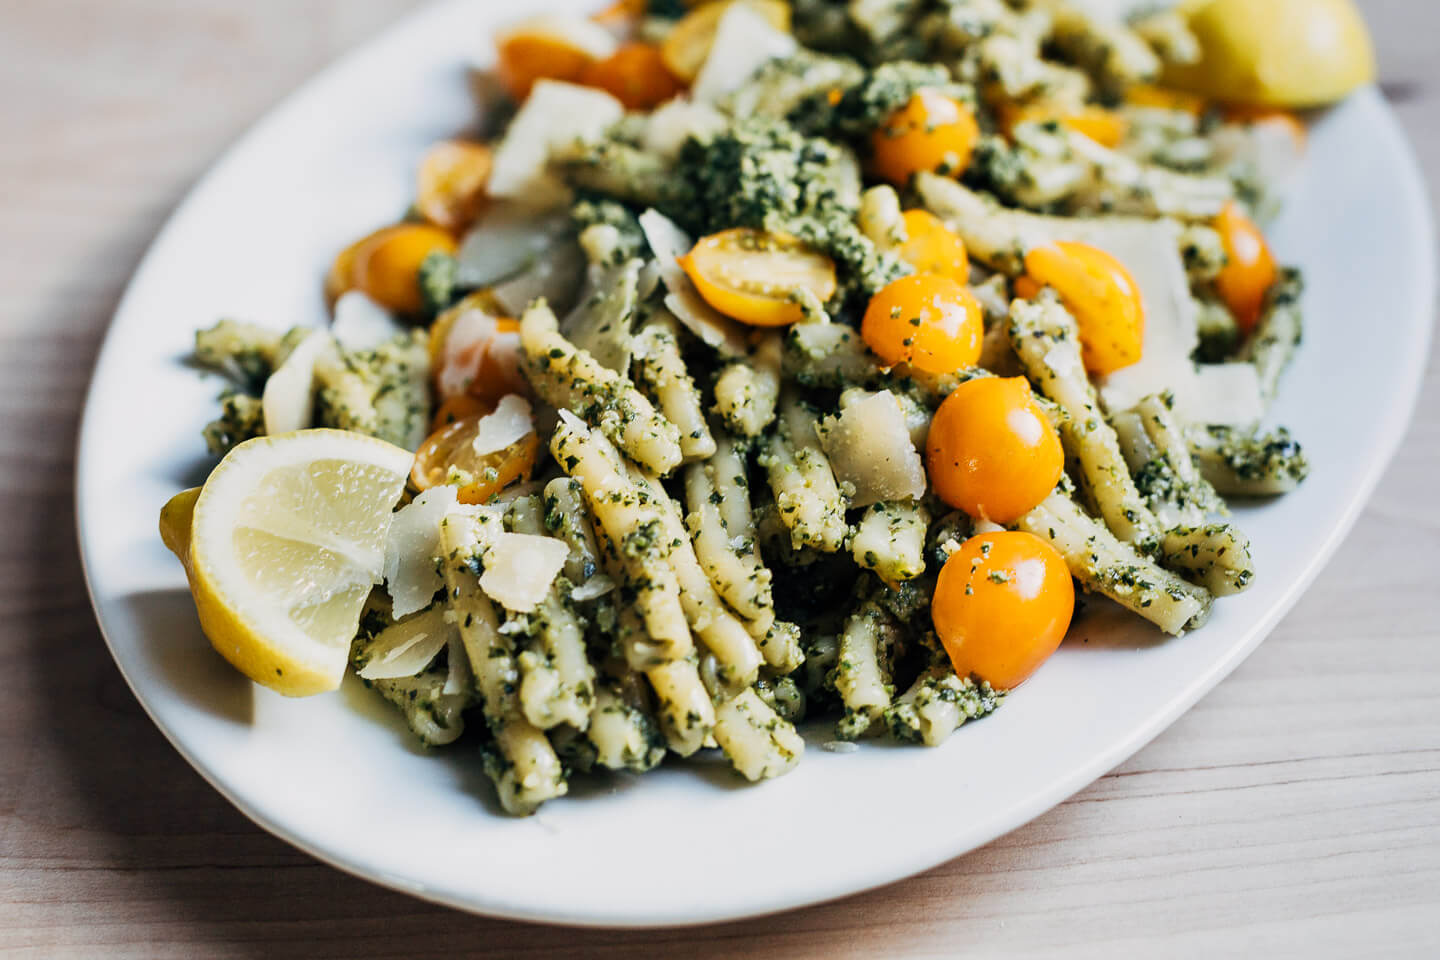 Zucchini pesto served over pasta with Parmesan and sun gold tomatoes. 